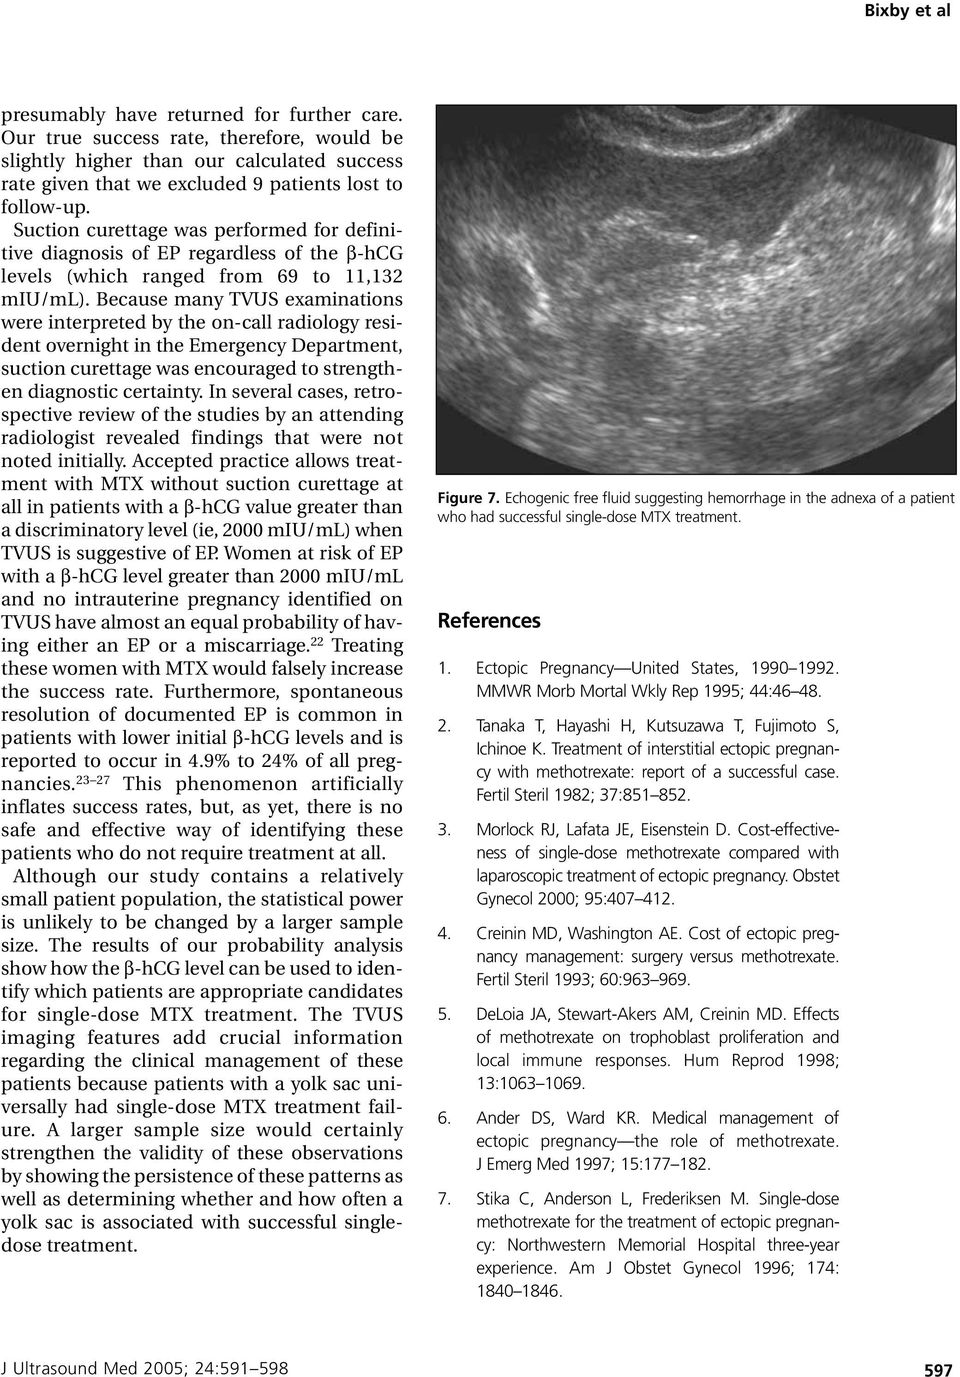 Because many TVUS examinations were interpreted by the on-call radiology resident overnight in the Emergency Department, suction curettage was encouraged to strengthen diagnostic certainty.